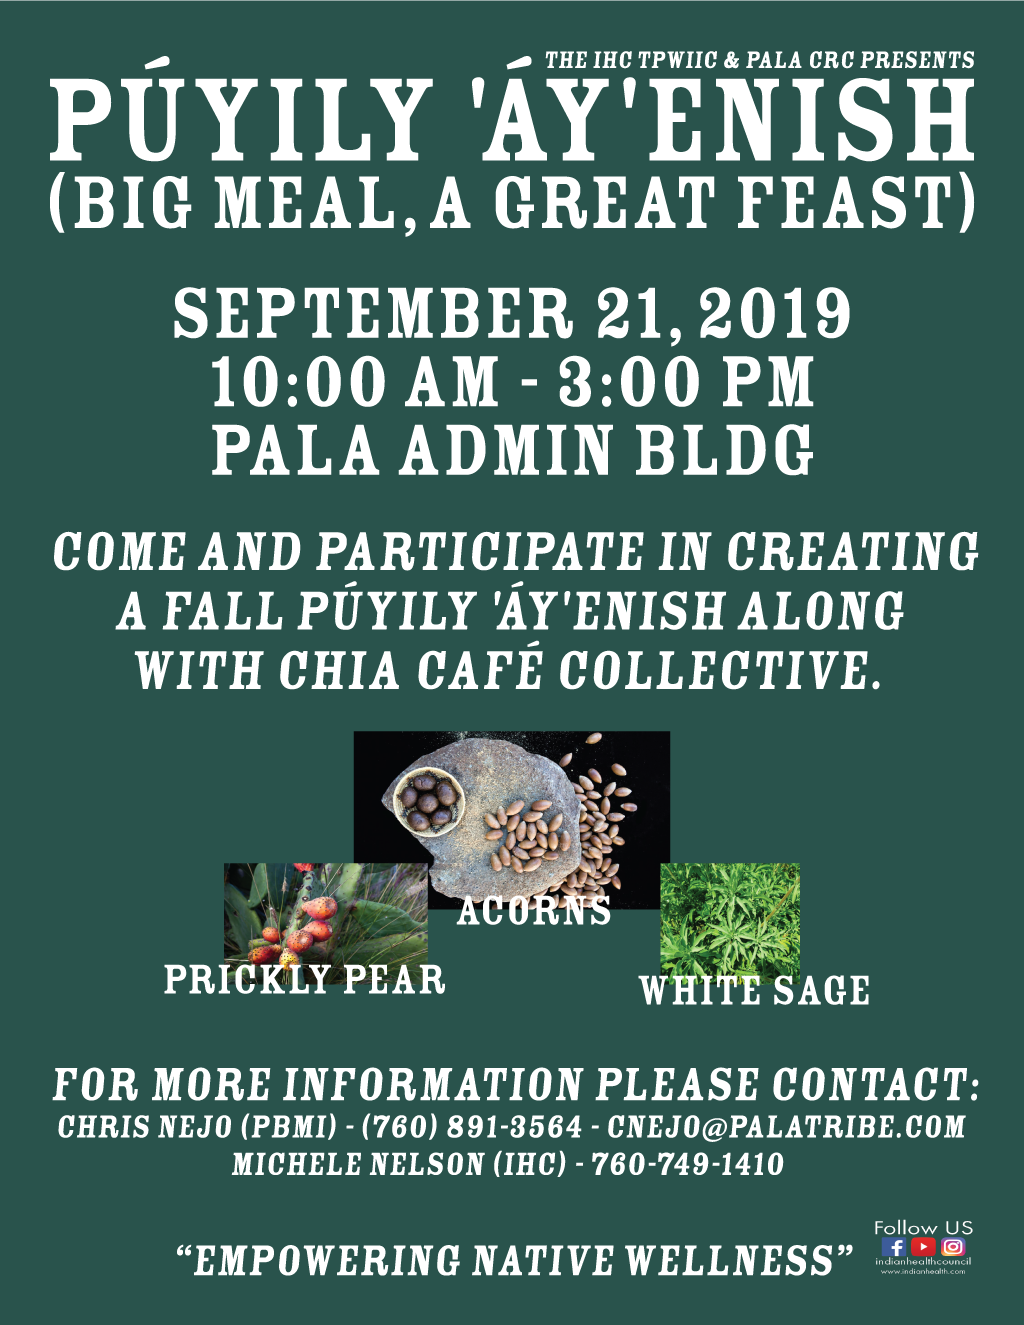 Pala Band of Mission Indians Púyily 'Áy'enish Big Meal A Great Feast2019